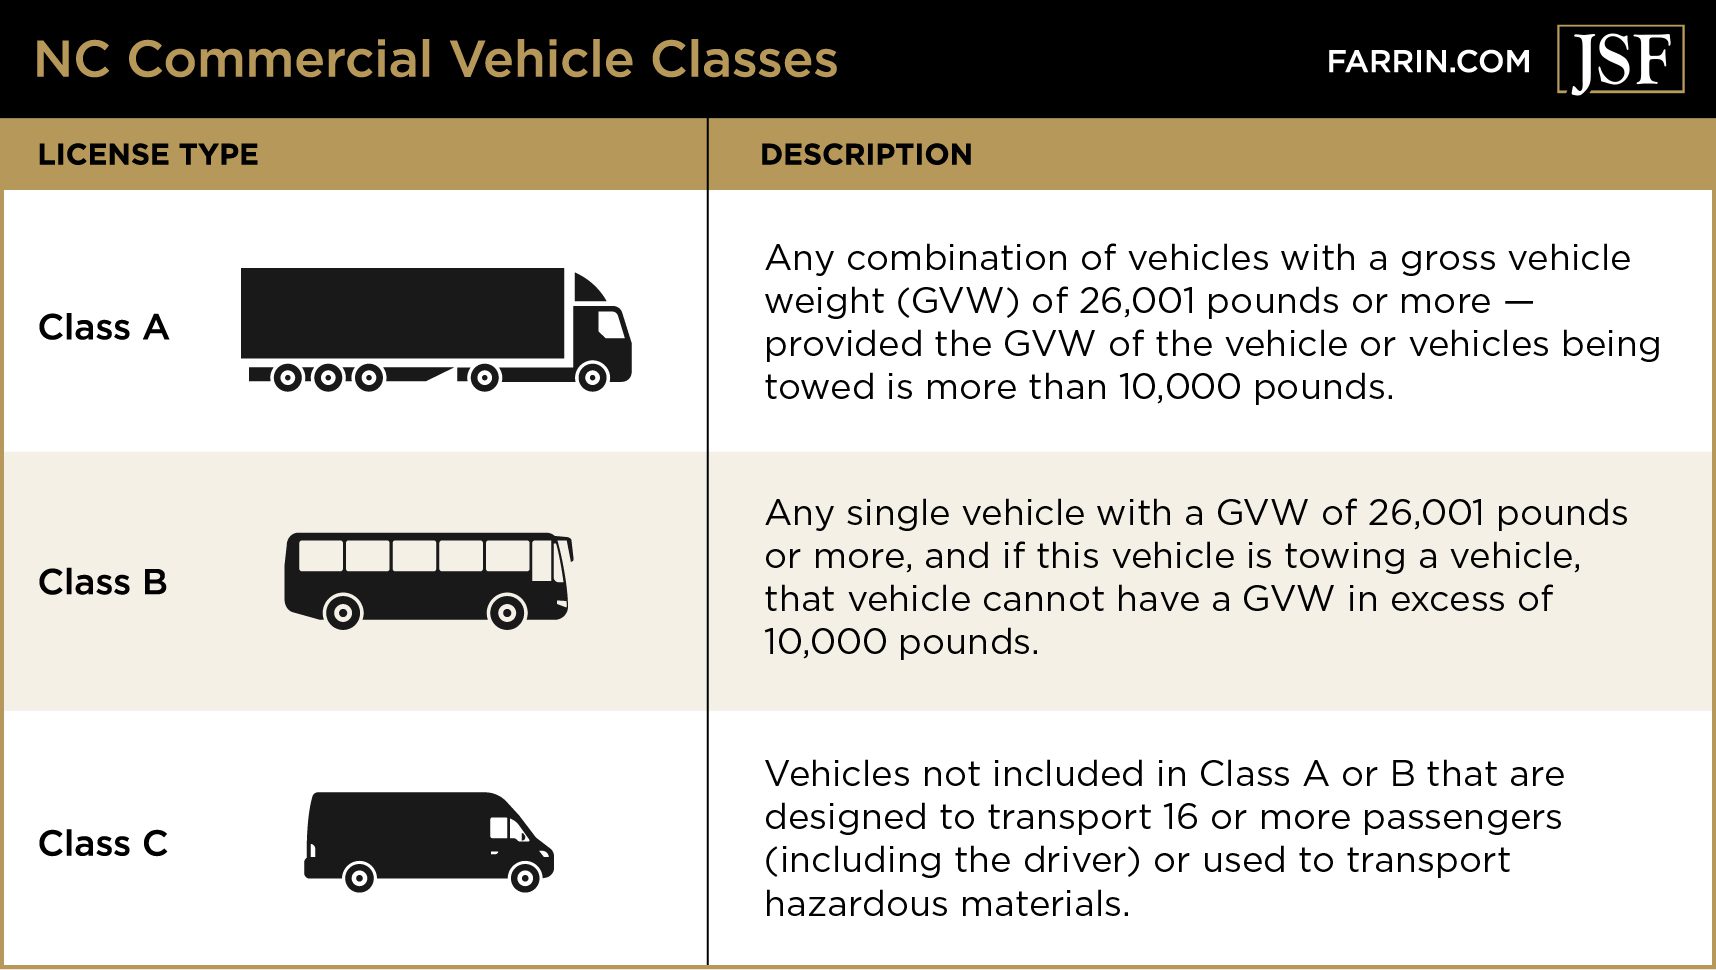 Licenses for commercial vehicles in North Carolina are divided into three classes.